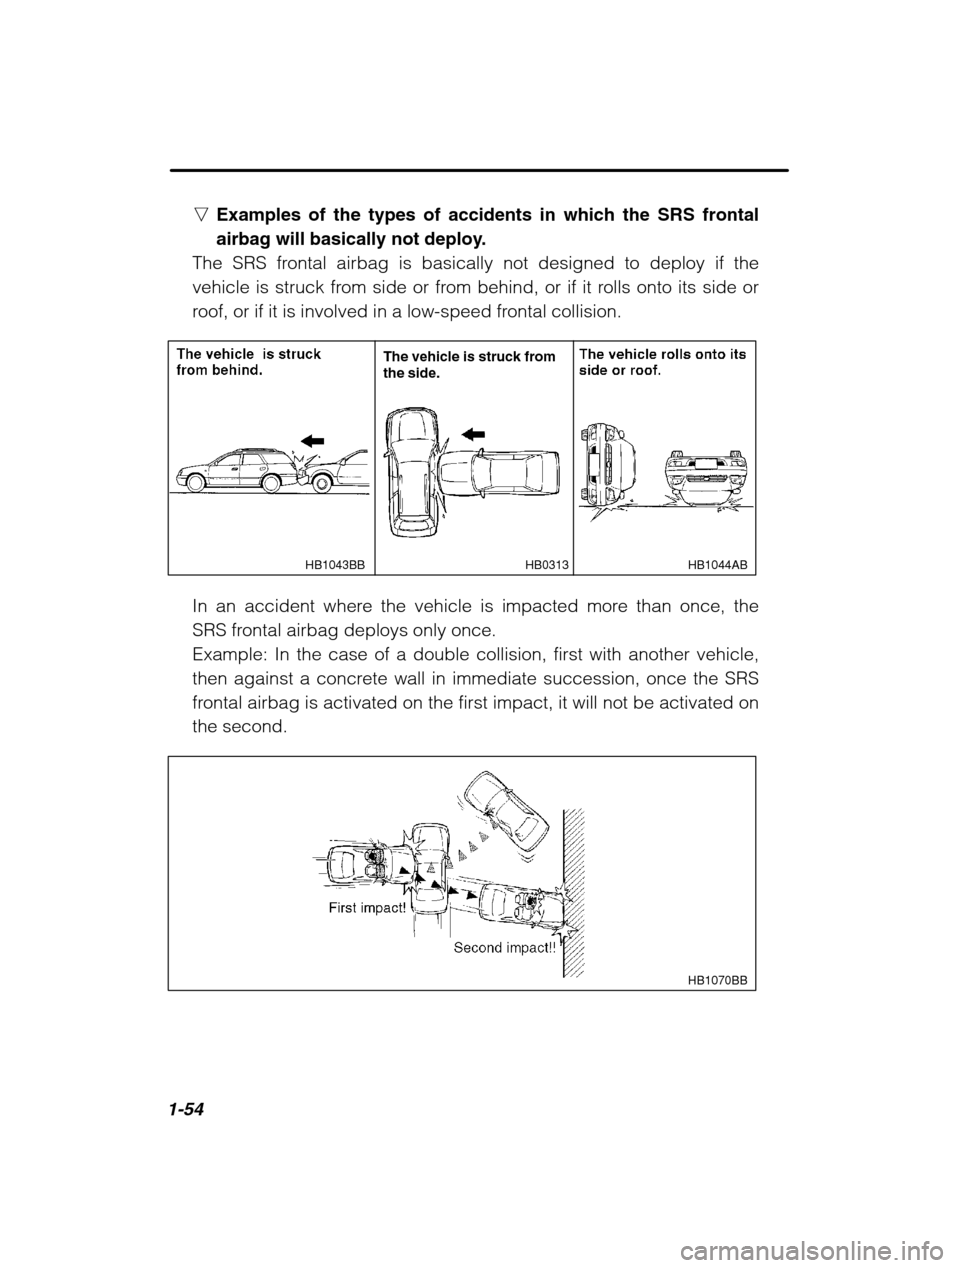 SUBARU OUTBACK 2002 3.G Owners Manual 1-54
nExamples of the types of accidents in which the SRS frontal 
airbag will basically not deploy.
The SRS frontal airbag is basically not designed to deploy if the
vehicle is struck from side or fr